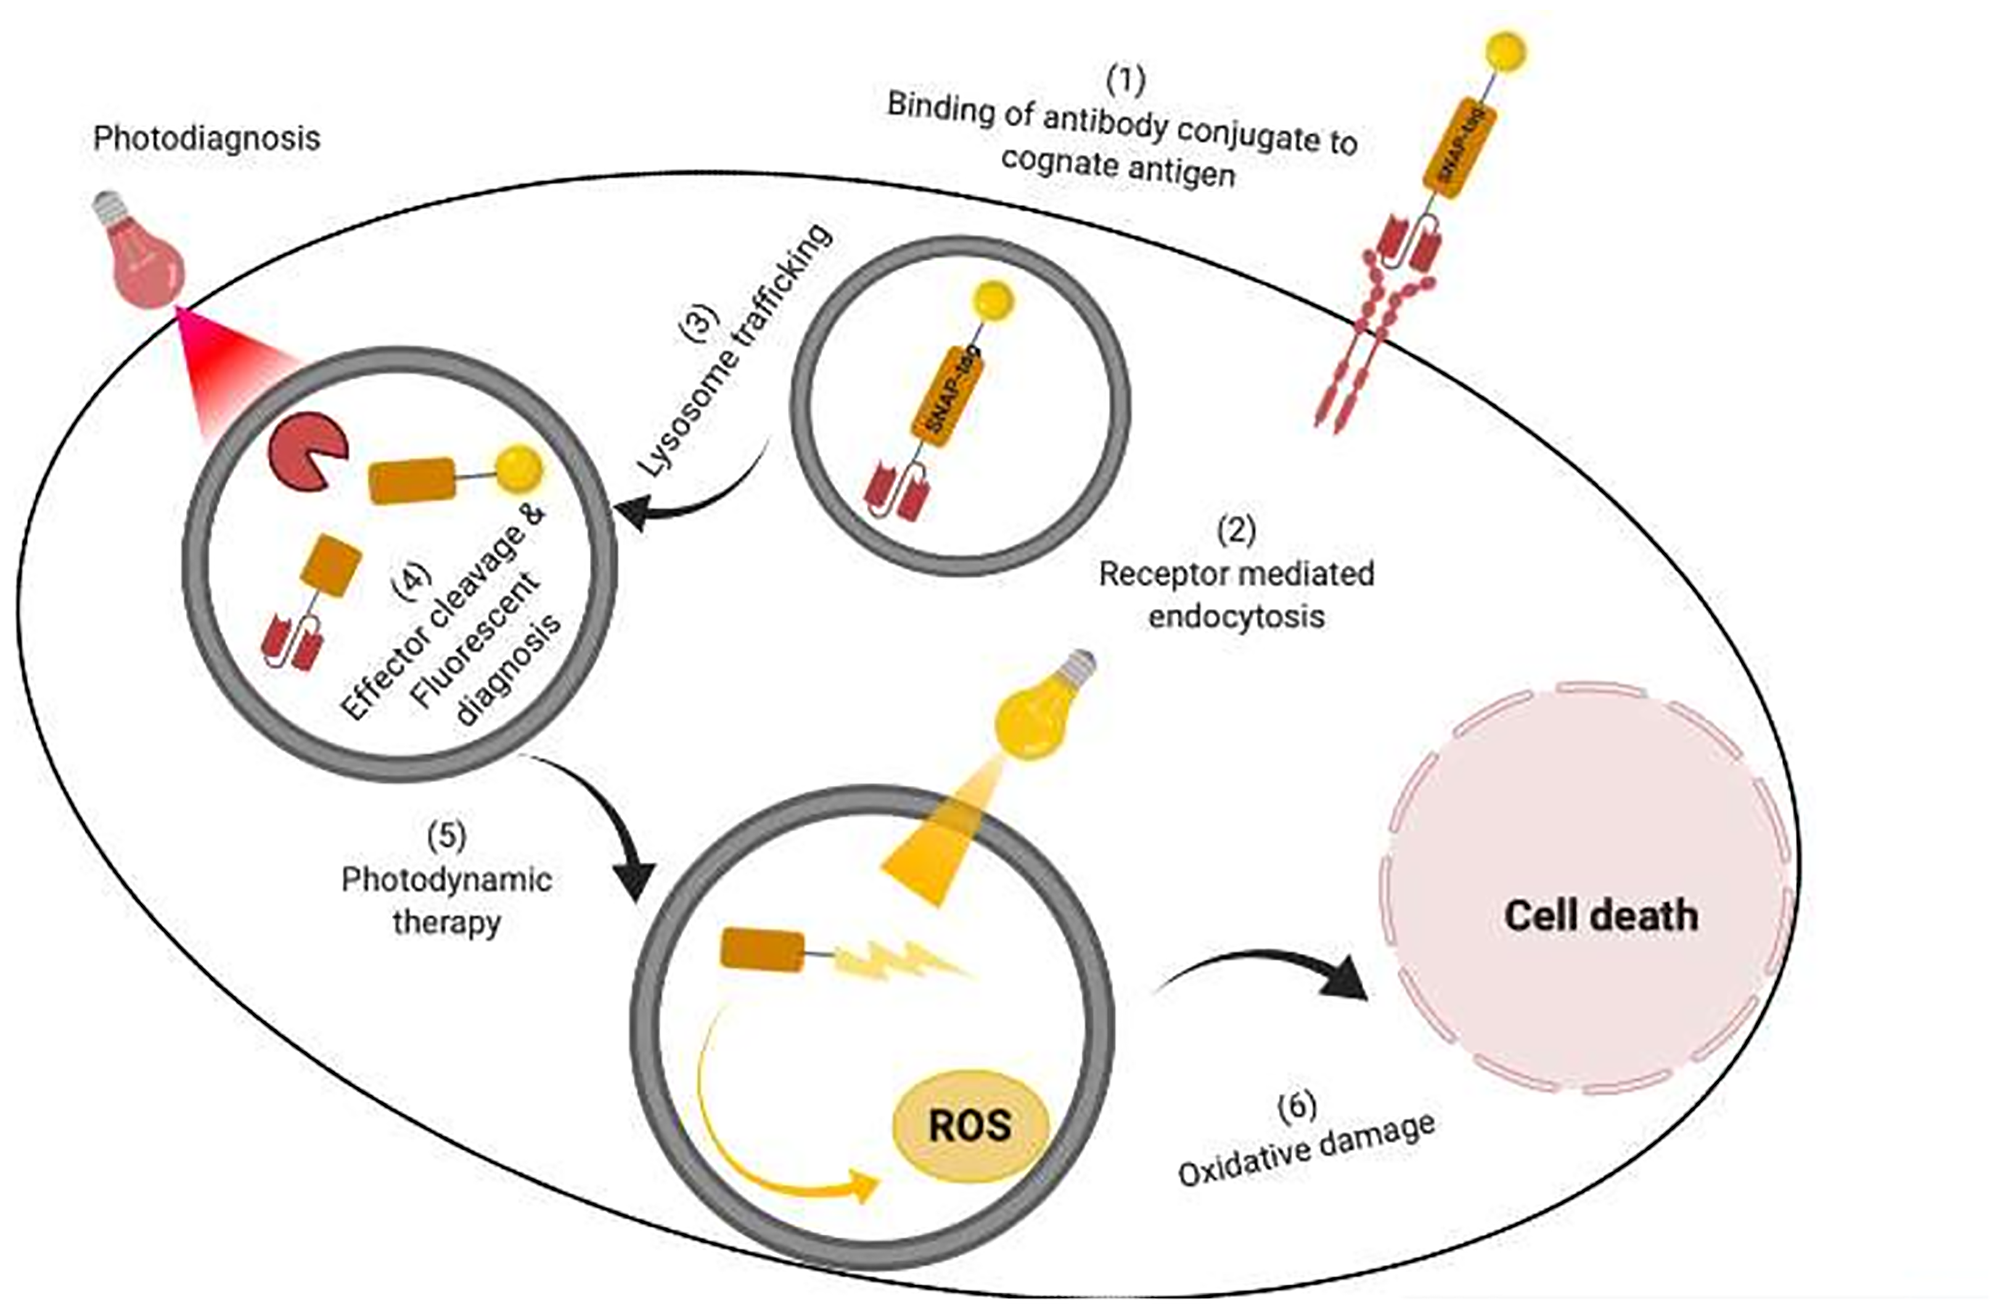 An illustration of targeted delivery of photoimmunotheranostic agent to specifically detect and kill cancer cells.